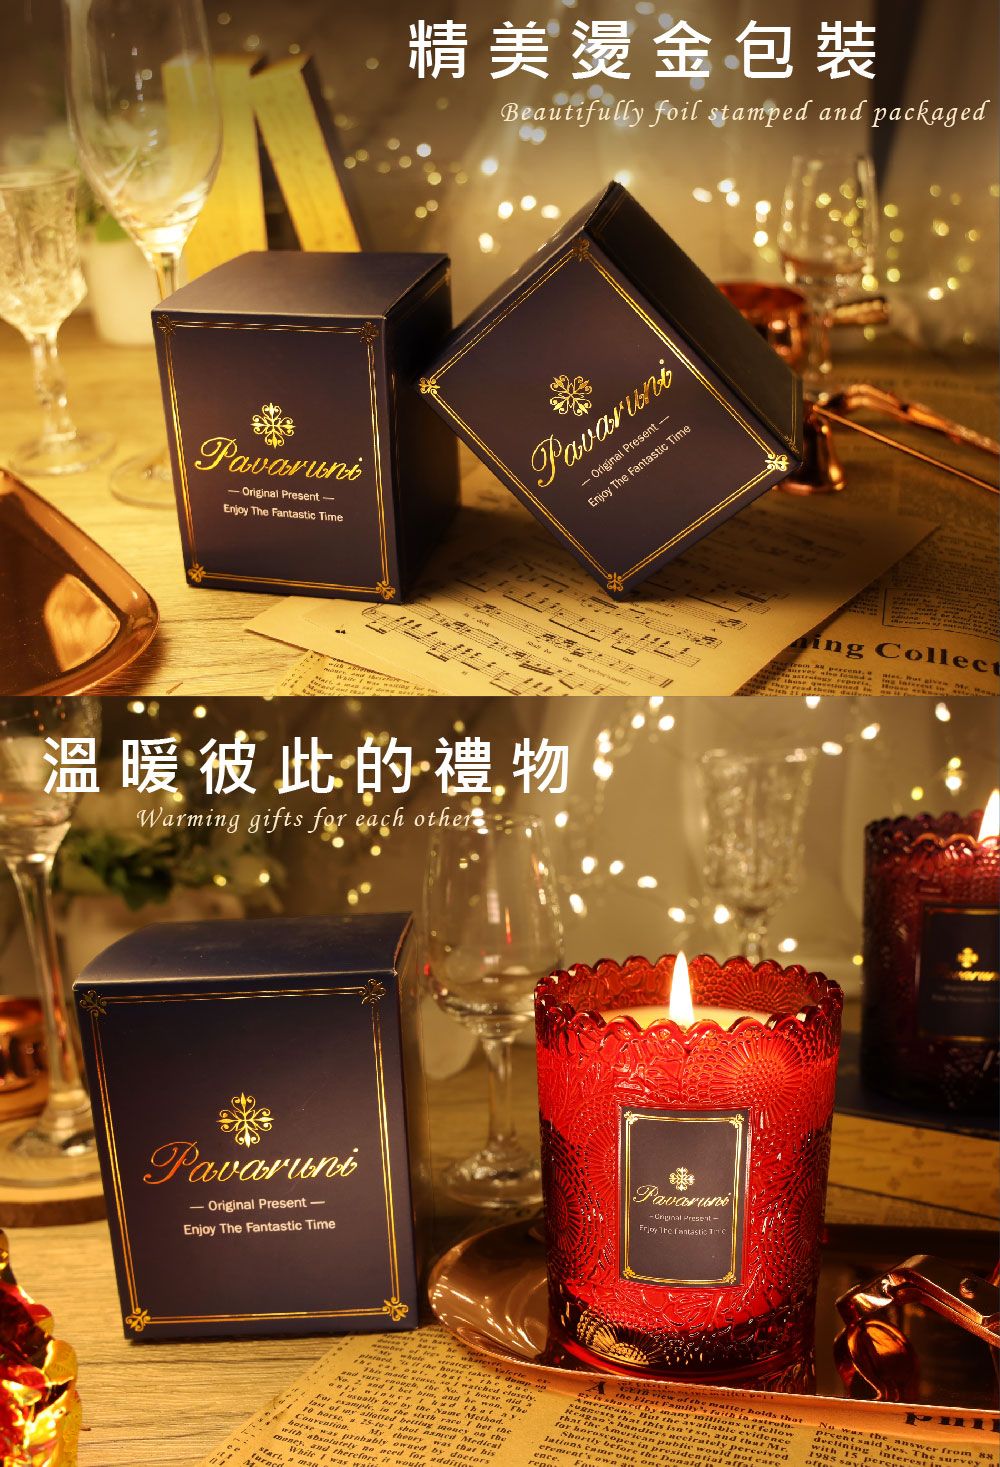 Pvaruni Original PresEnjoy  Fantastic Time精美燙金包裝Beautully foil stamped  packagedPavaruni- Original 溫暖彼此的禮物Warming gifts  each orPavaruni-Original Present-Enjoy  Fantastic TimeEnjoy The Fantastic TimePavaruni Present- The Fantastic ing Collect  if             the       by     the   forwas   therefore     holds  that the for     and  erements  athe  ent the yes from   The